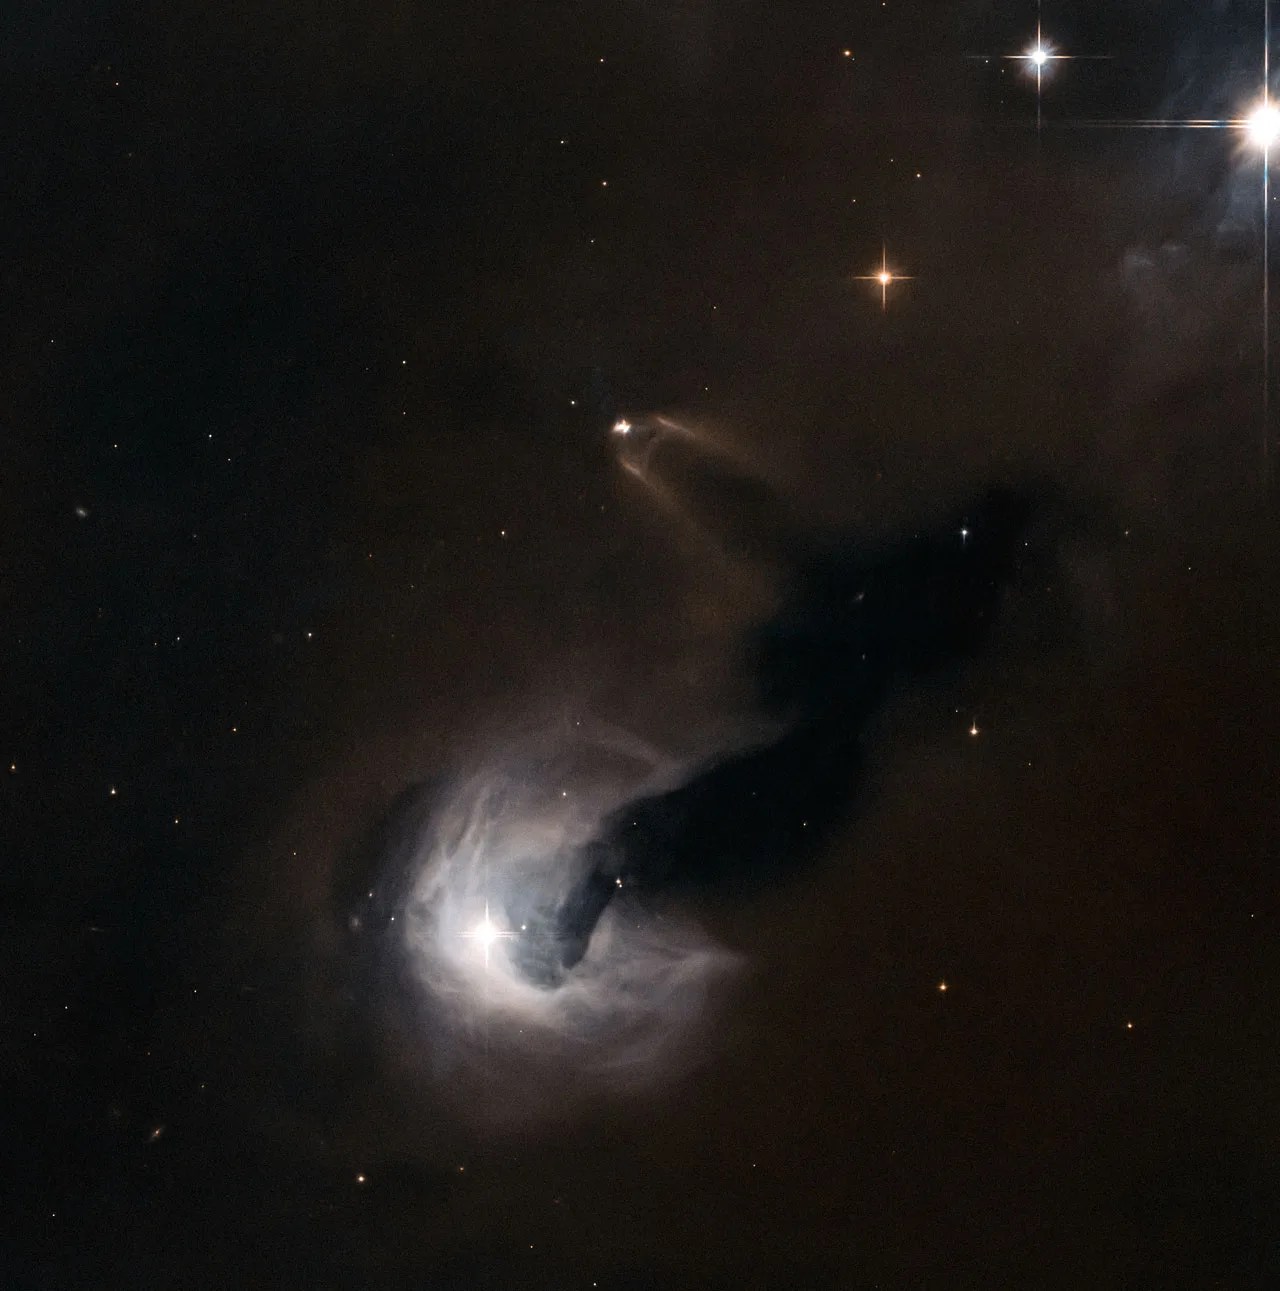 Hubble space telescope image showing a small young stellar object in the early stages of its life, surrounded by a bright disk o